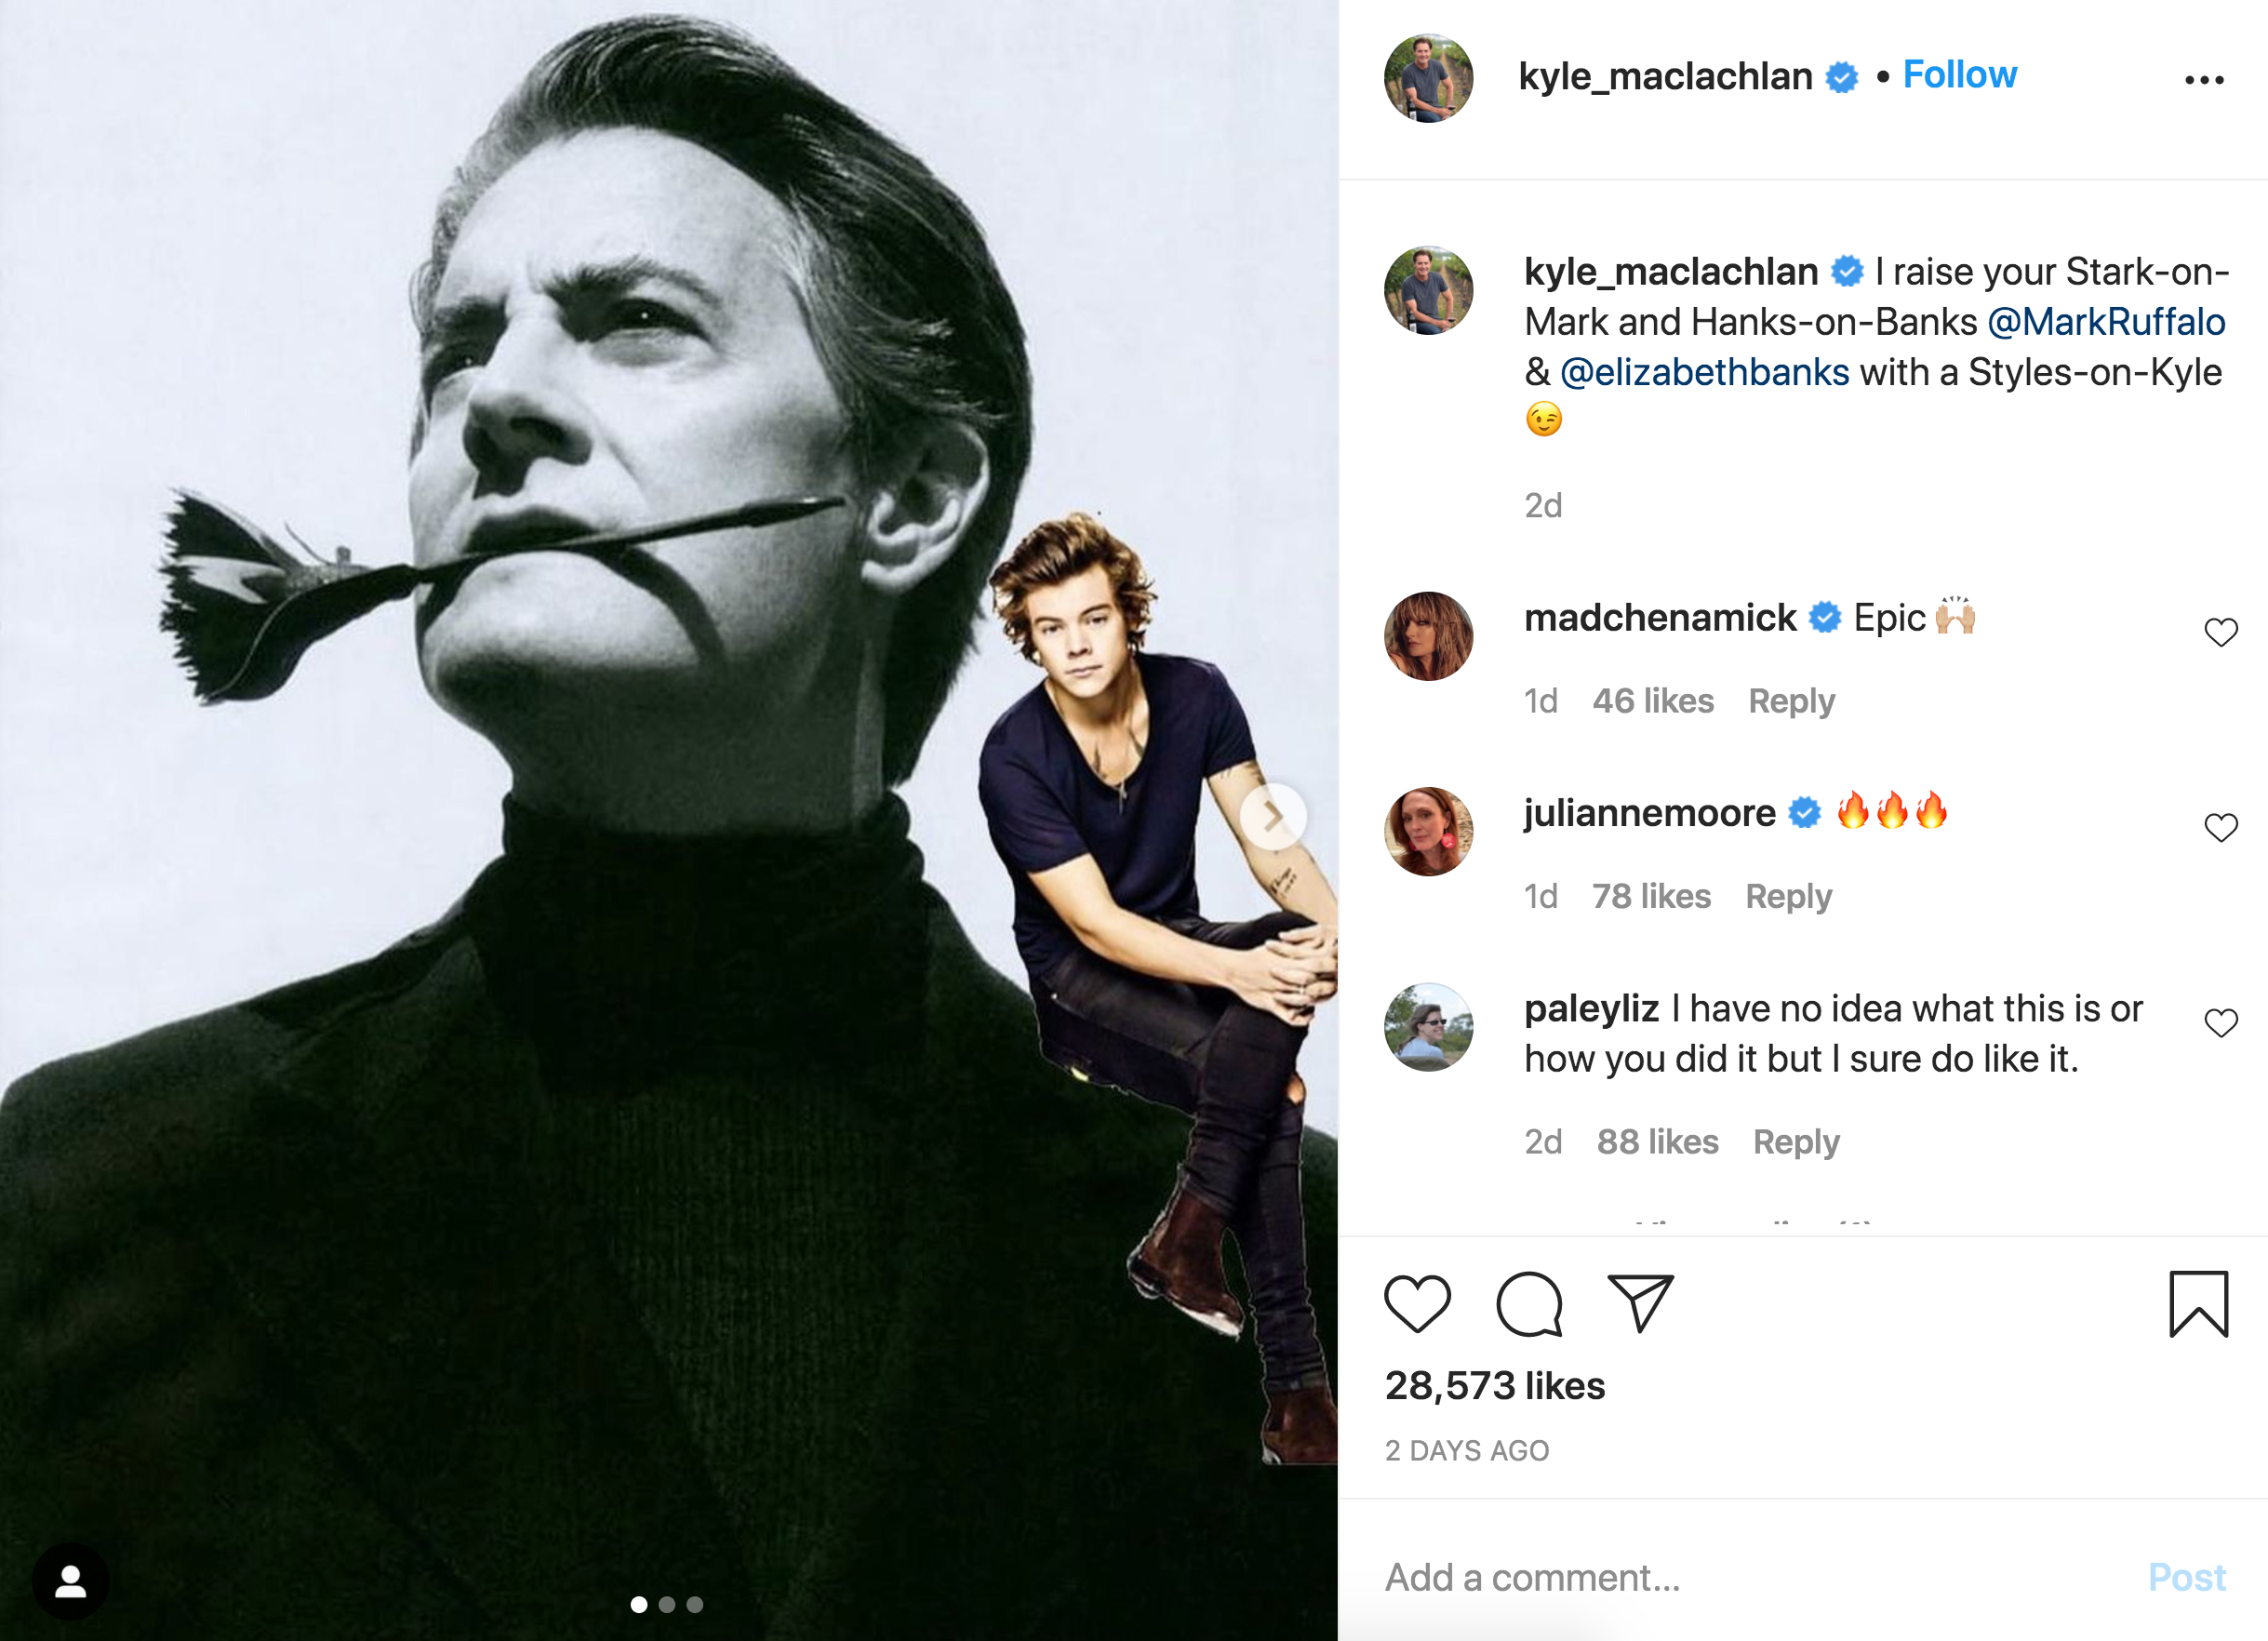 kyle maclachlan rose - kyle_maclachlan kyle_maclachlan I raise your Starkon Mark and HanksonBanks Ruffalo & with a StylesonKyle 2d madchenamick Epic 1d 46 juliannemoore 1d 78 paleyliz I have no idea what this is or how you did it but I sure do it. 2d 88 K